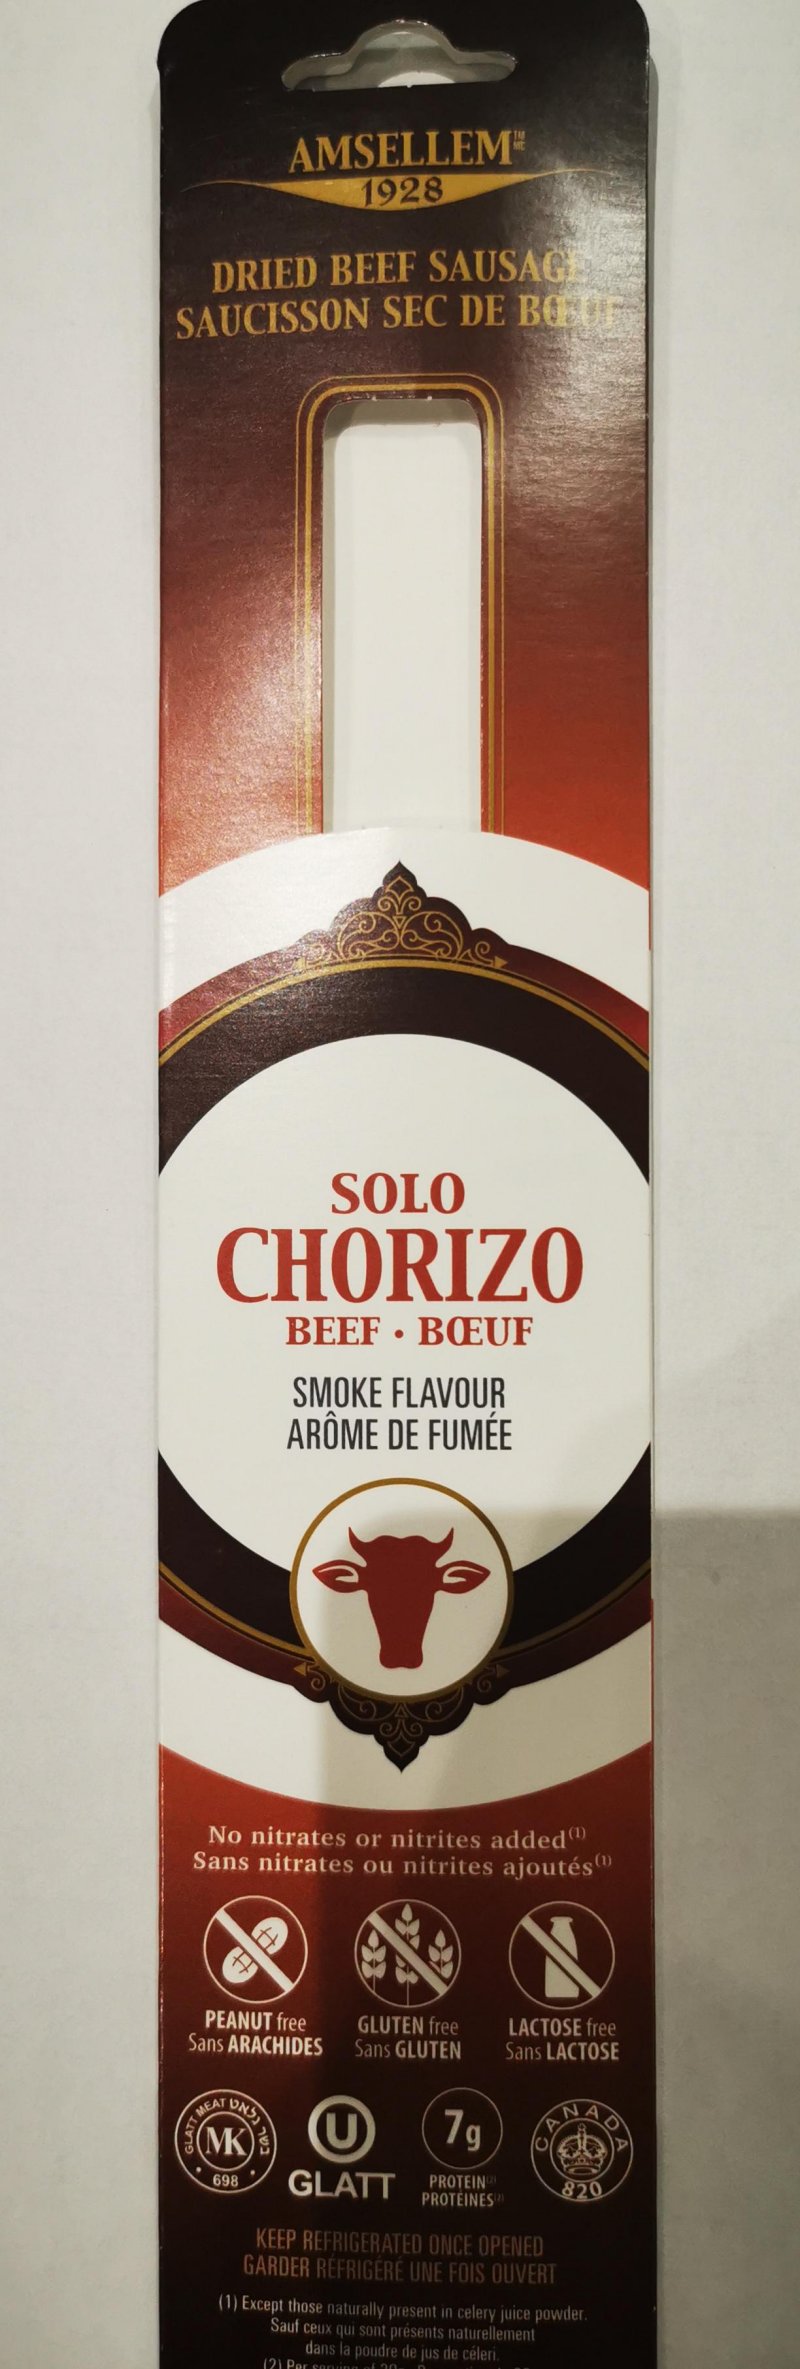 Amsellem brand Solo Chorizo – Dried Beef Sausage recalled due to Salmonella